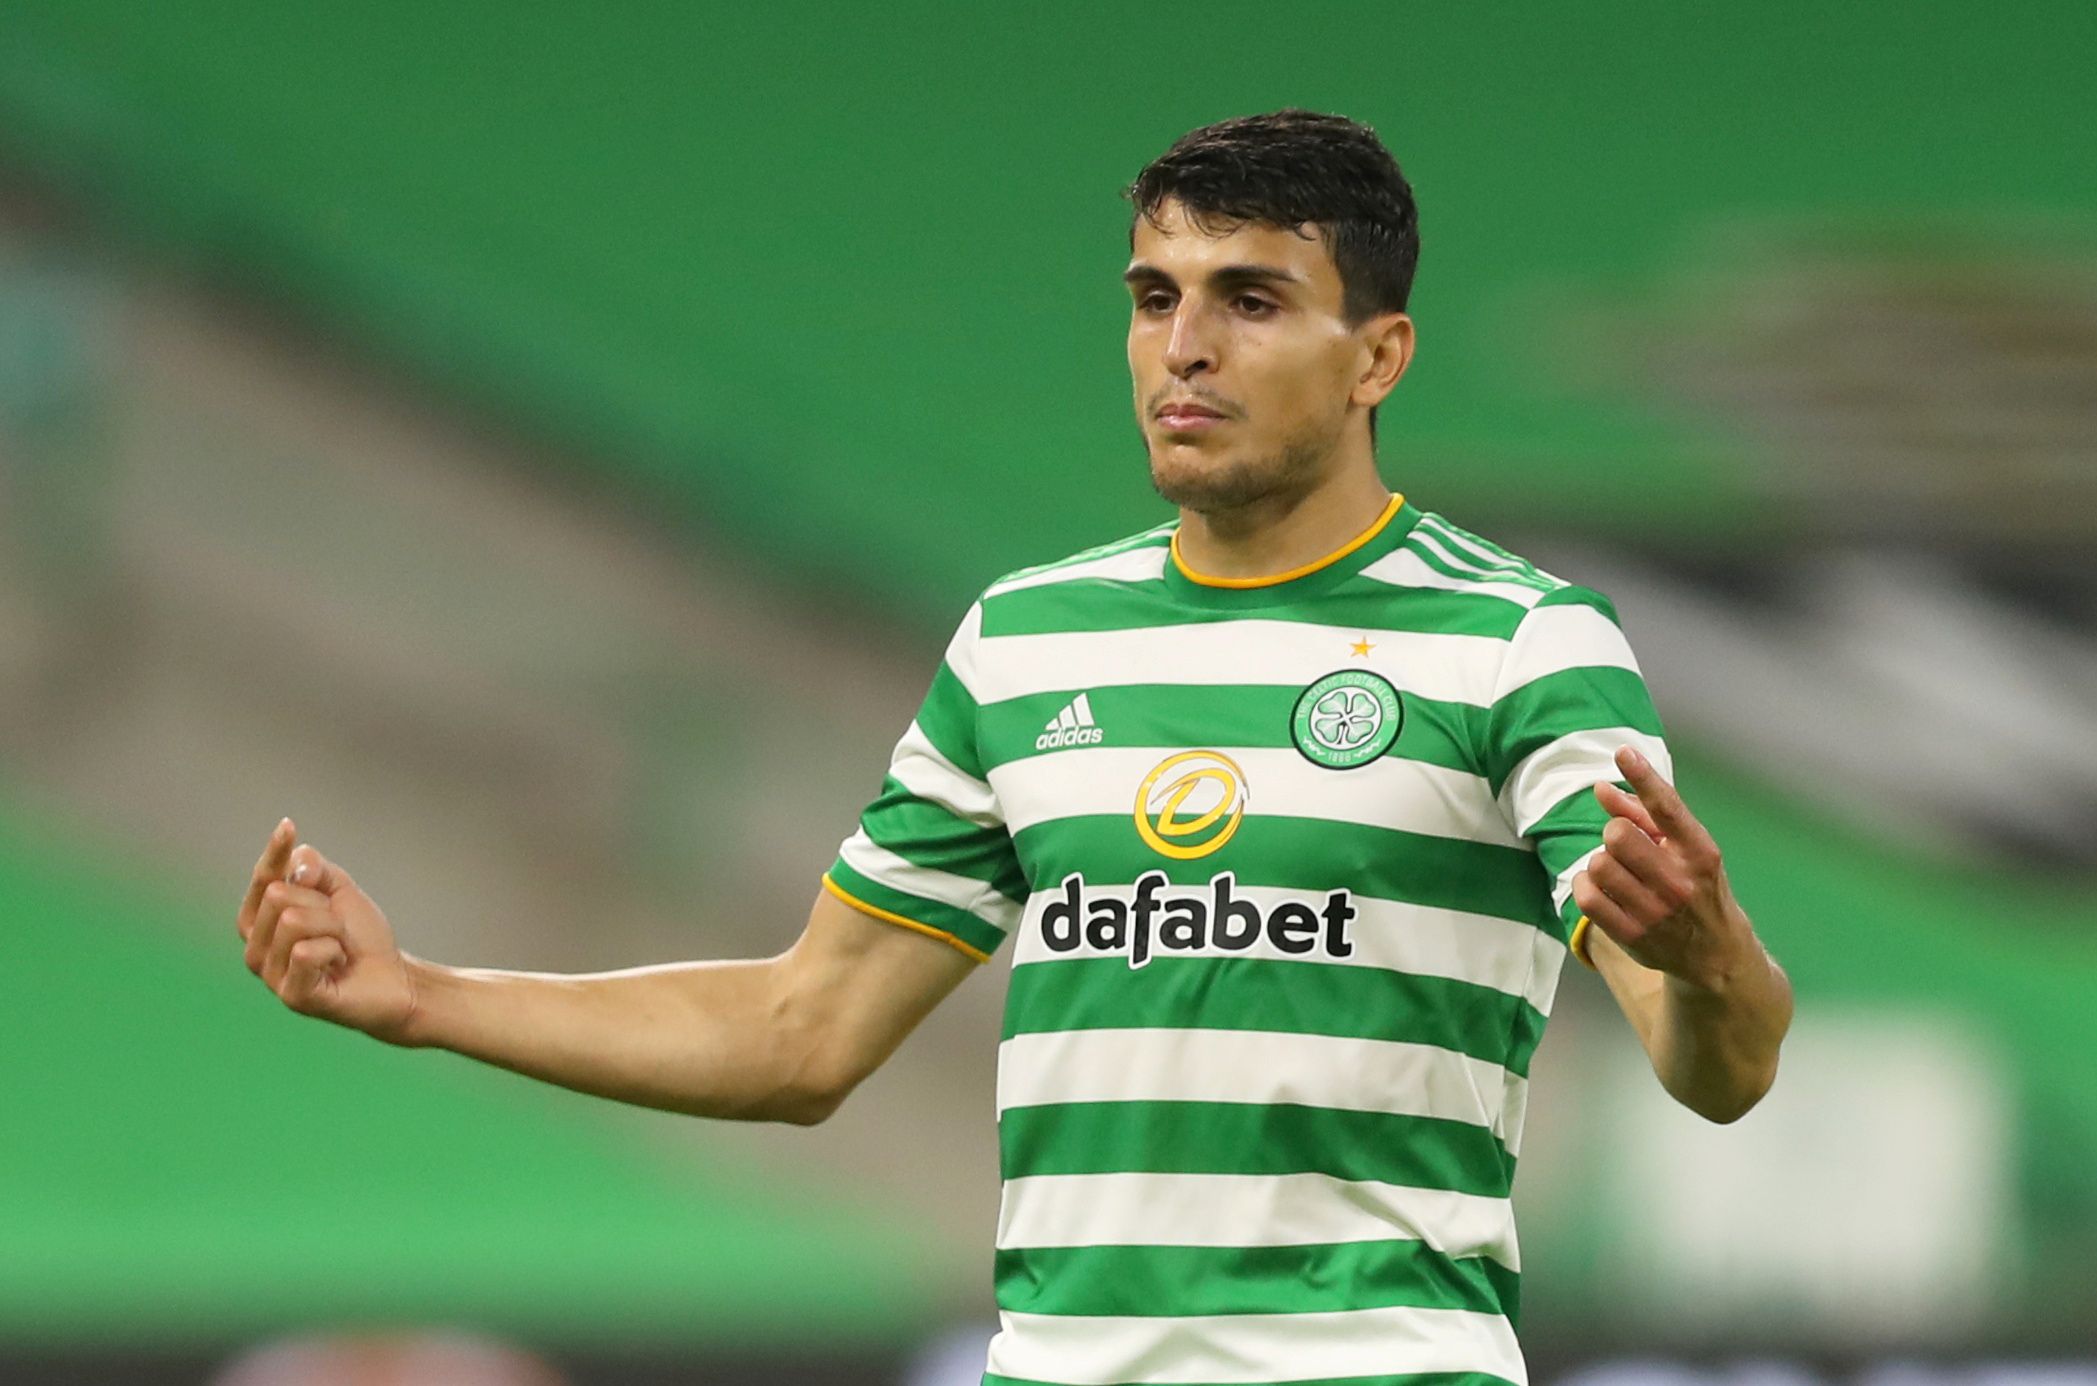 Soccer Football - Champions League First Qualifying Round - Celtic v KR Reykjavik - Celtic Park, Glasgow, Britain - August 18, 2020  Celtic's Mohamed Elyounoussi reacts during the match  REUTERS/Russell Cheyne